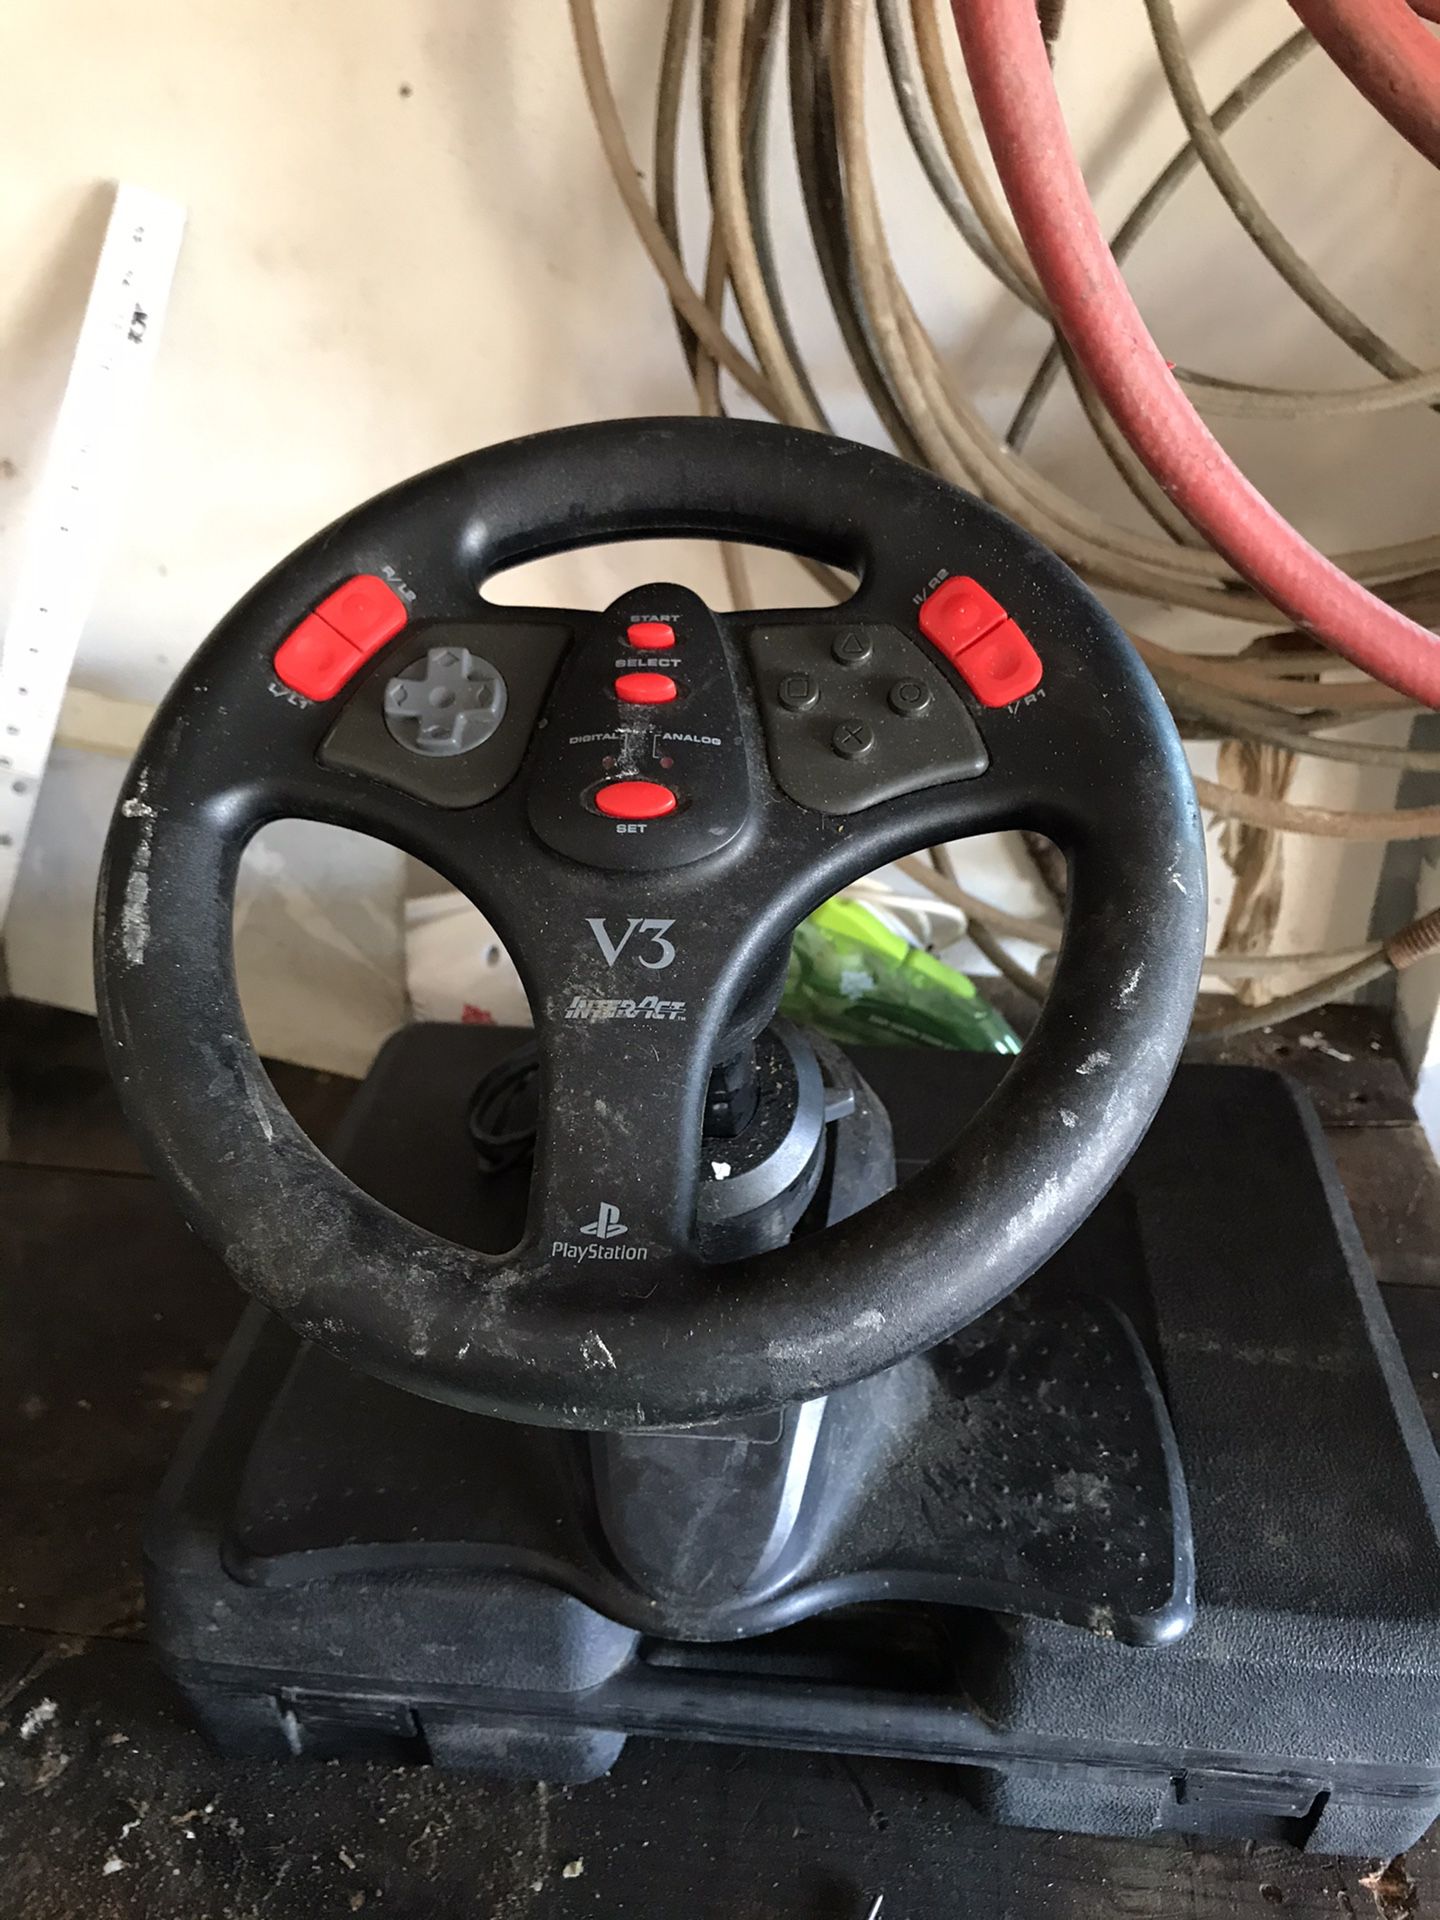 Pro sport racing wheel and pedals